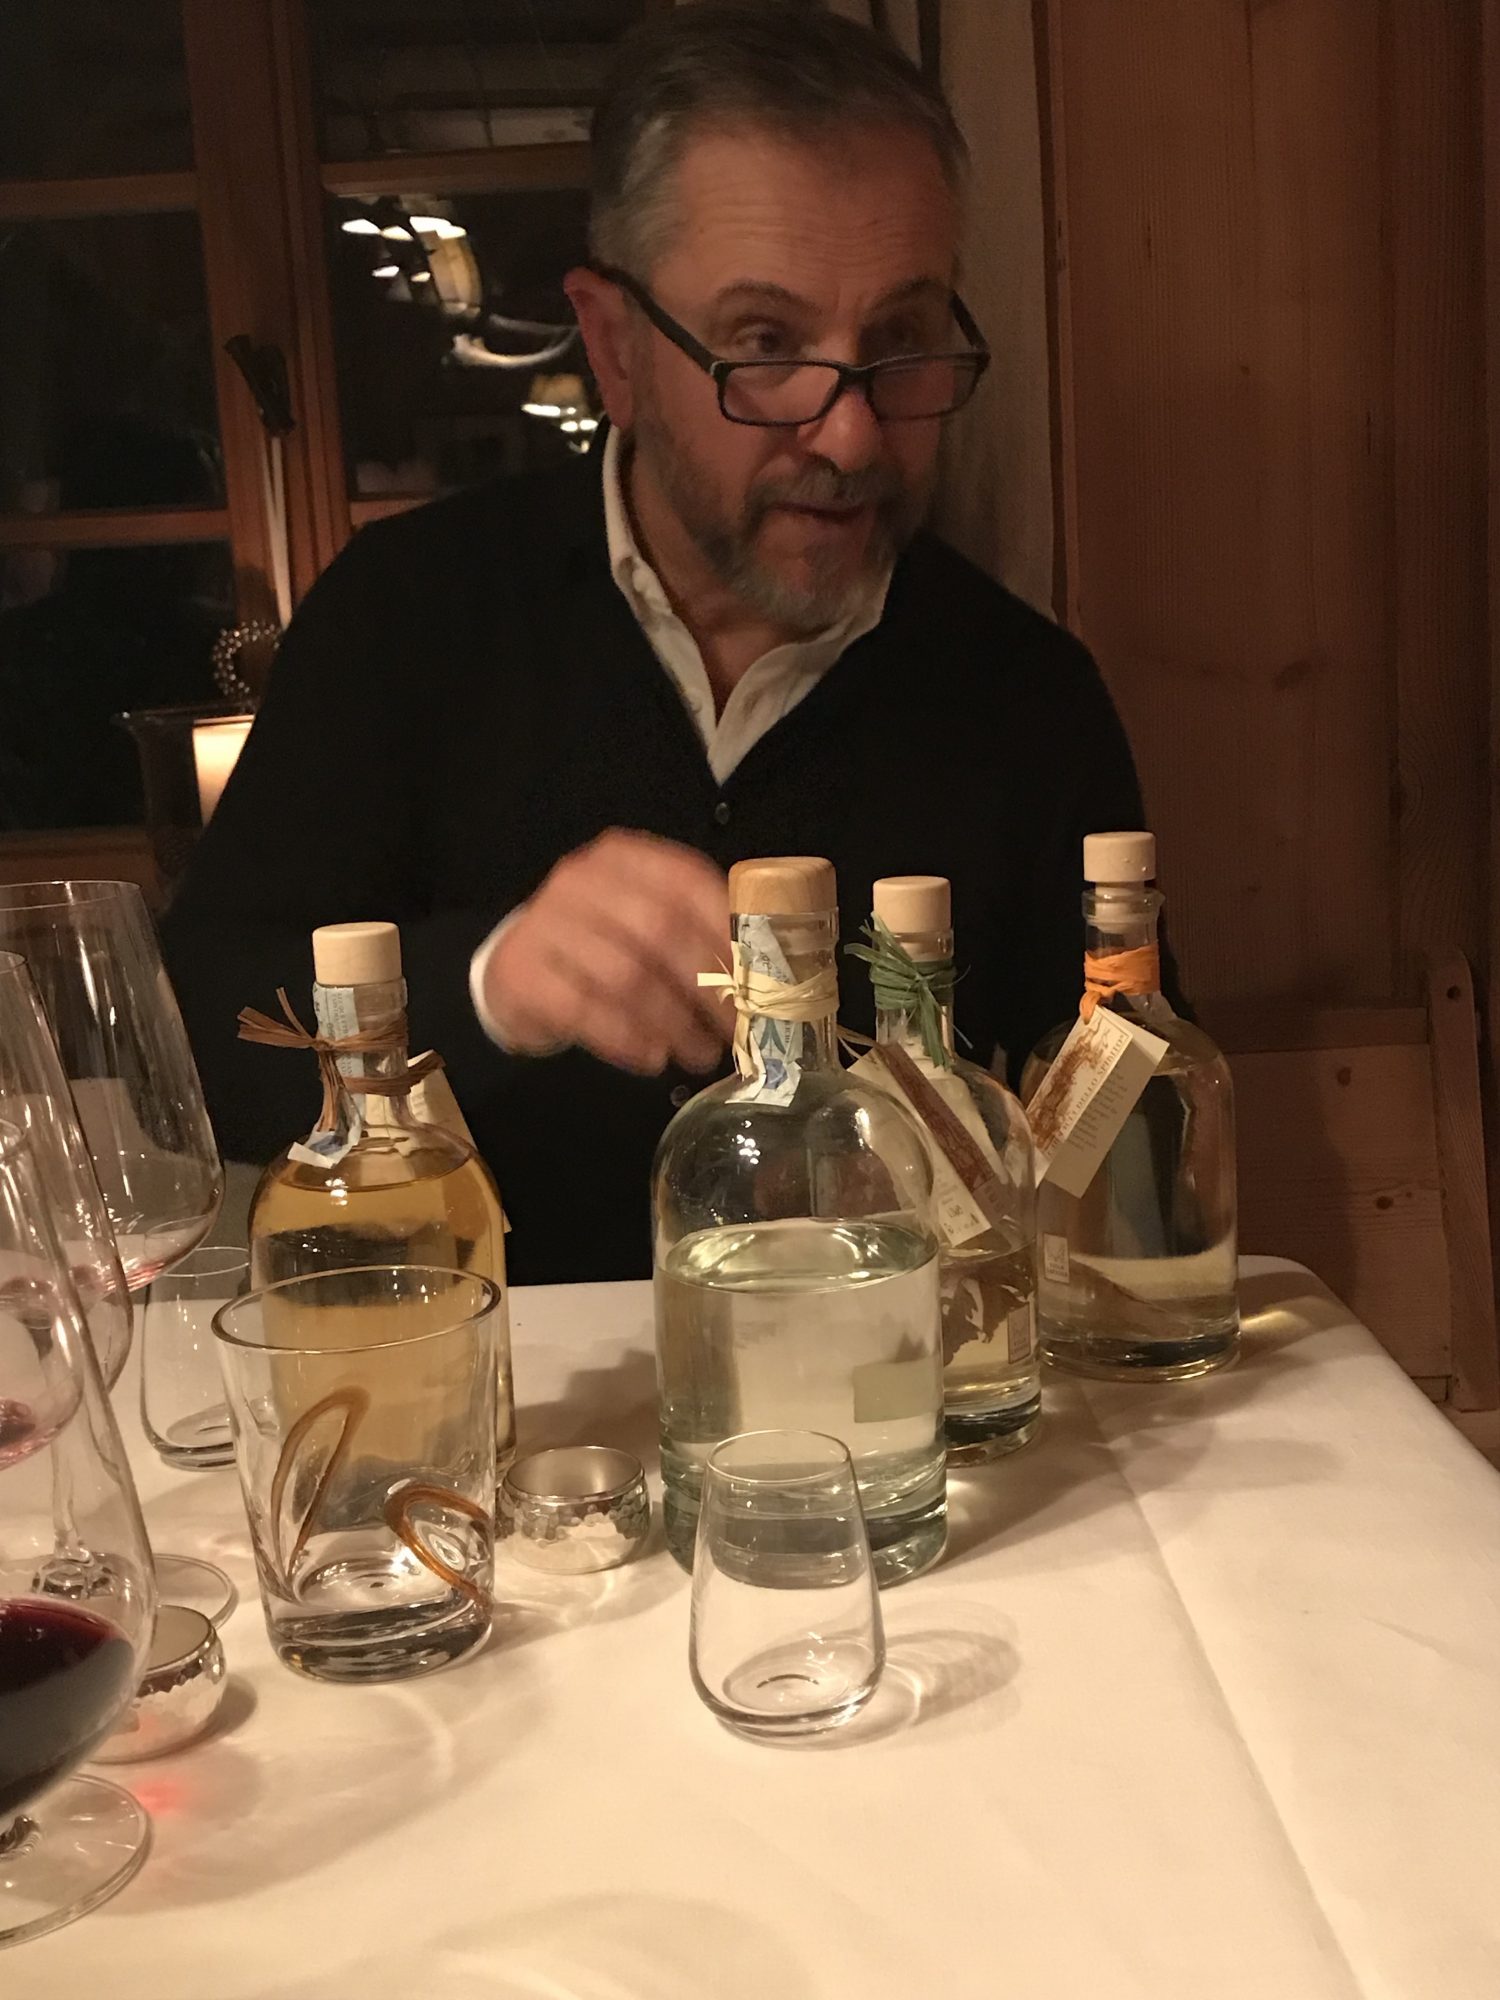 Stefano Barbini, the owner of San Lorenzo Lodges, brings some grappas to enjoy after the meal finished. Photo: The-Ski-Guru. Spot on White Deer – San Lorenzo Mountain Lodge.